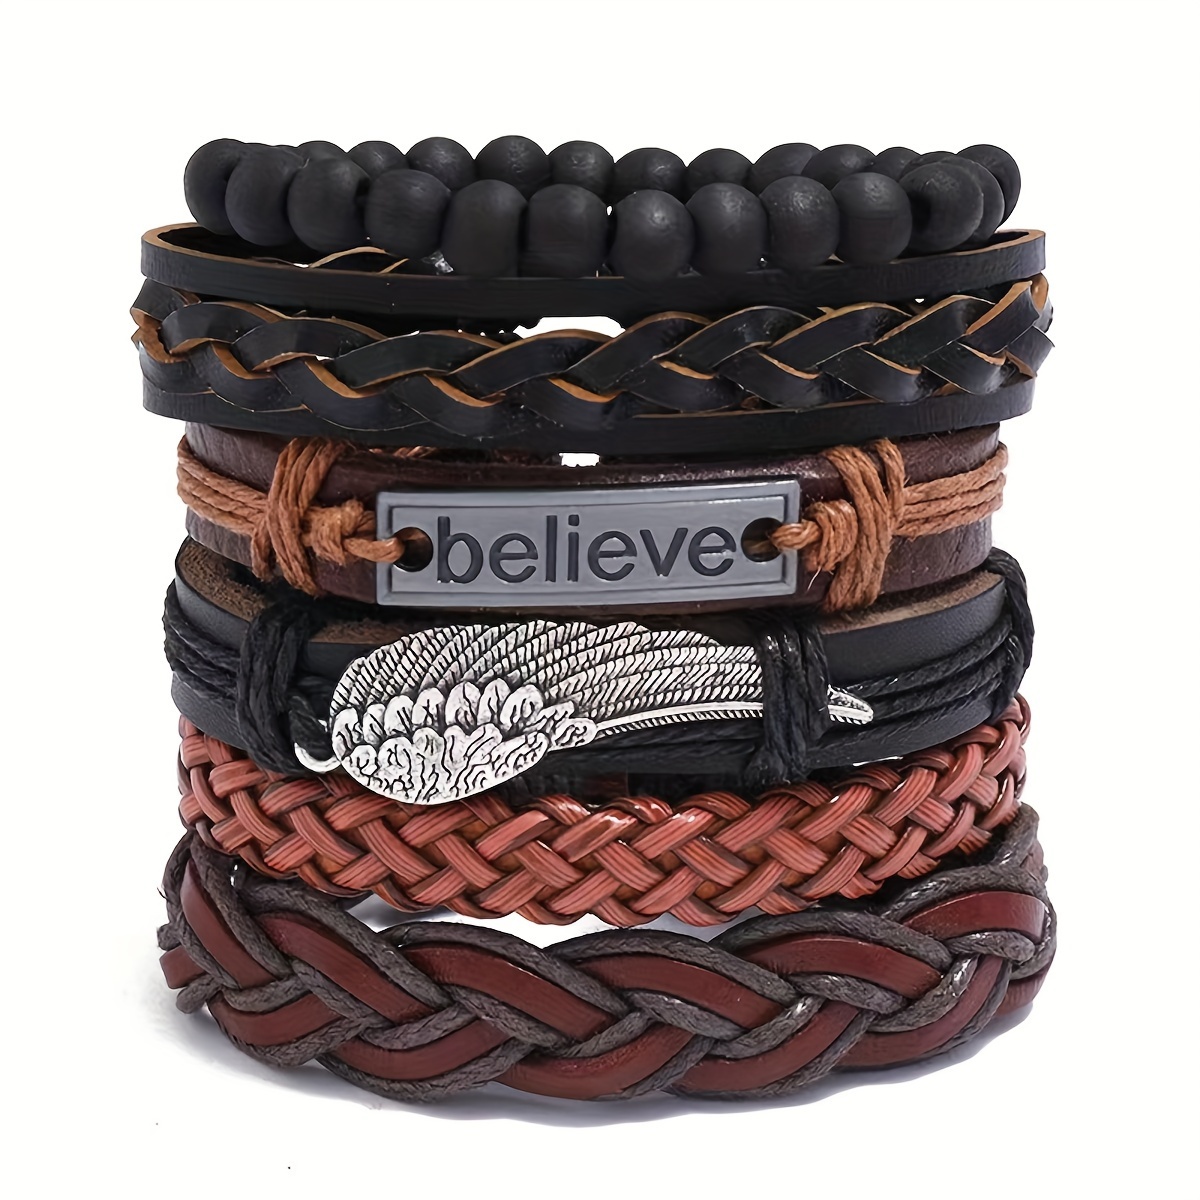 

6 Pcs Leather Braided Bracelet, Medieval Leather Cuff Wristband With Wing